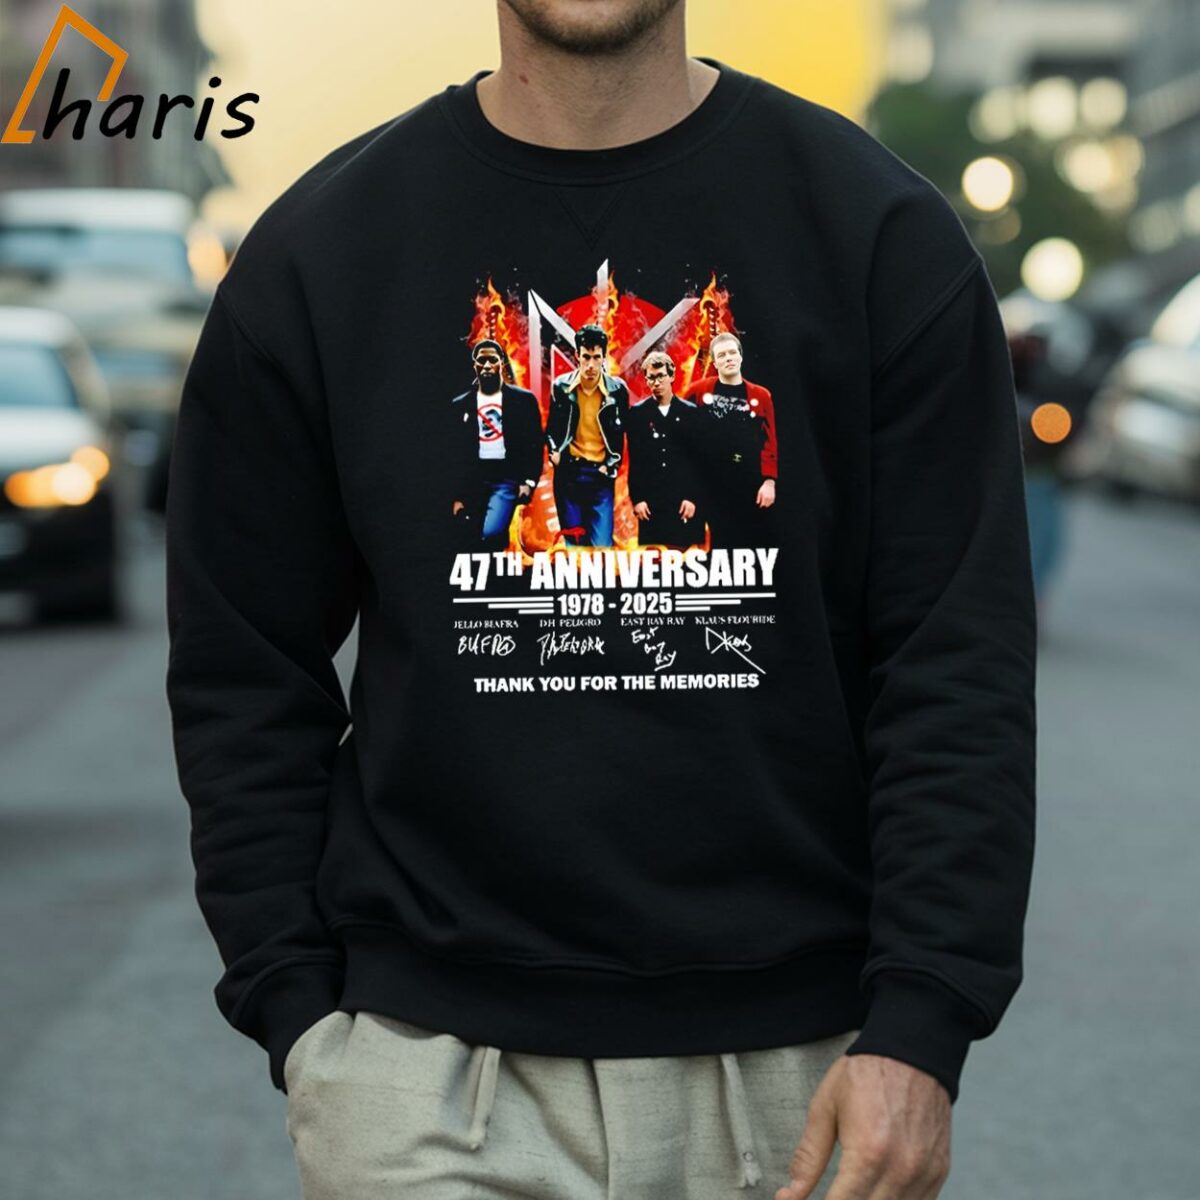 Dead Kennedys 47th Anniversary 1978 2025 Thank You For The Memories Shirt 4 Sweatshirt